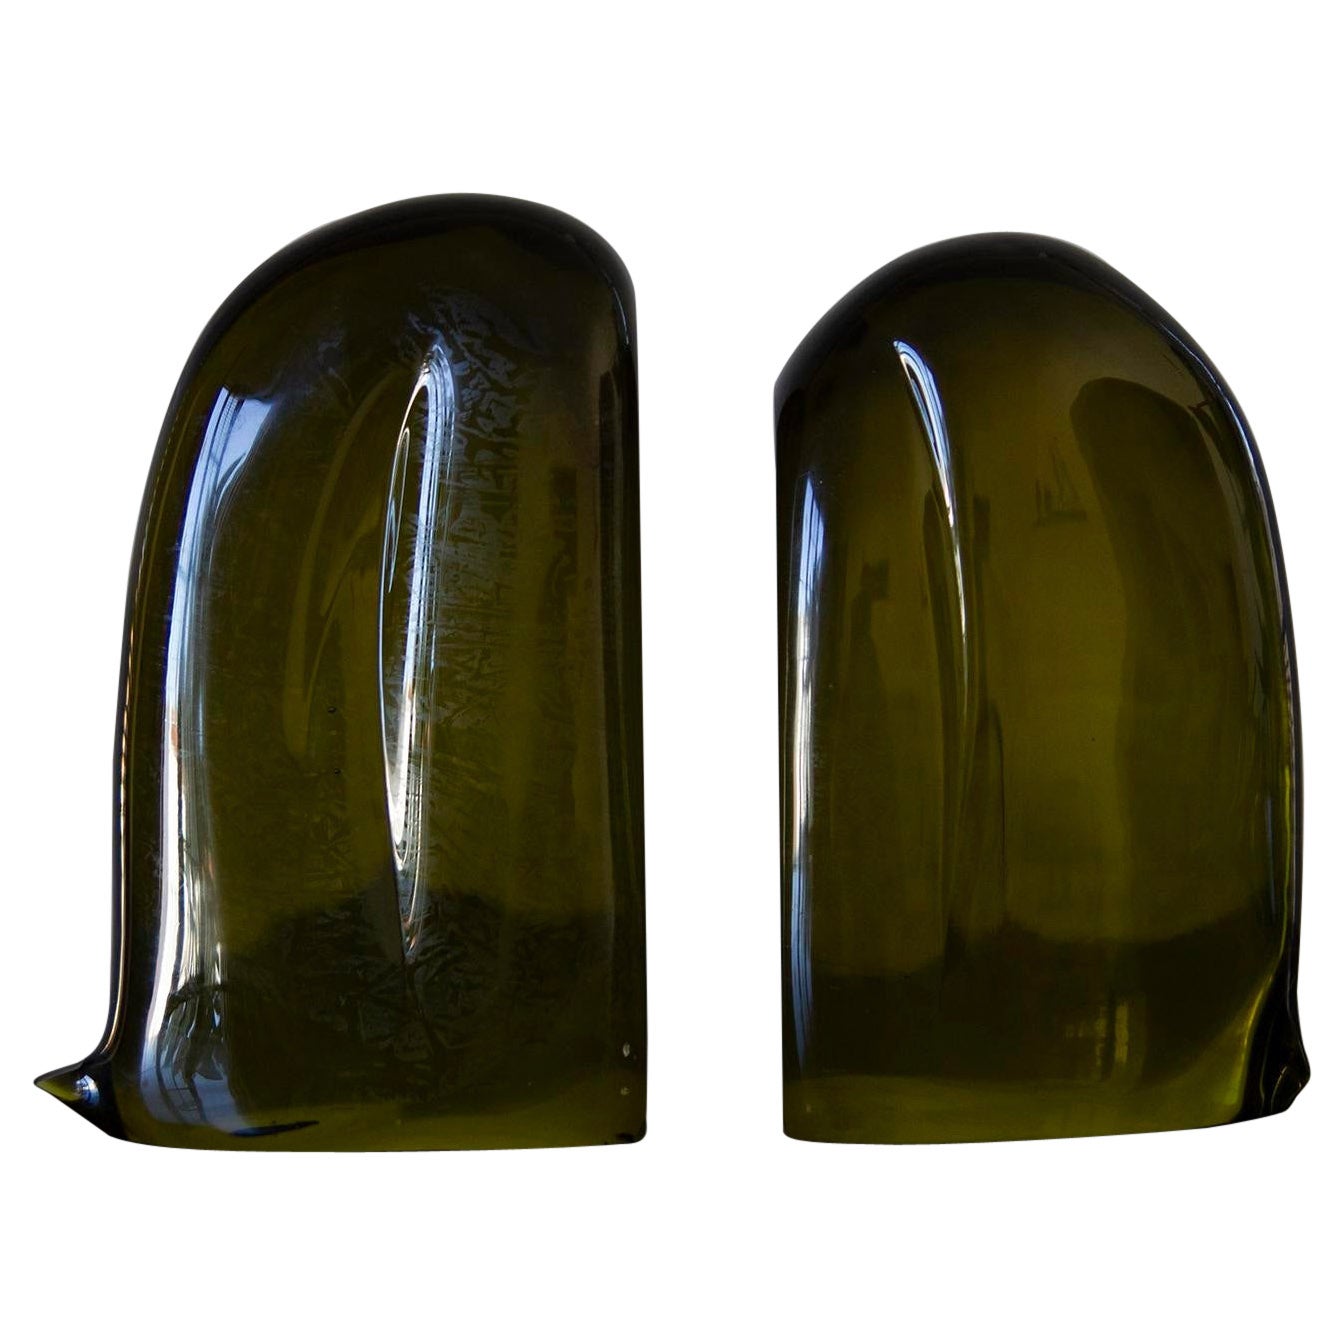 Vintage Mid-Century Modern Murano Amber Green Glass Bookends - a Pair For Sale